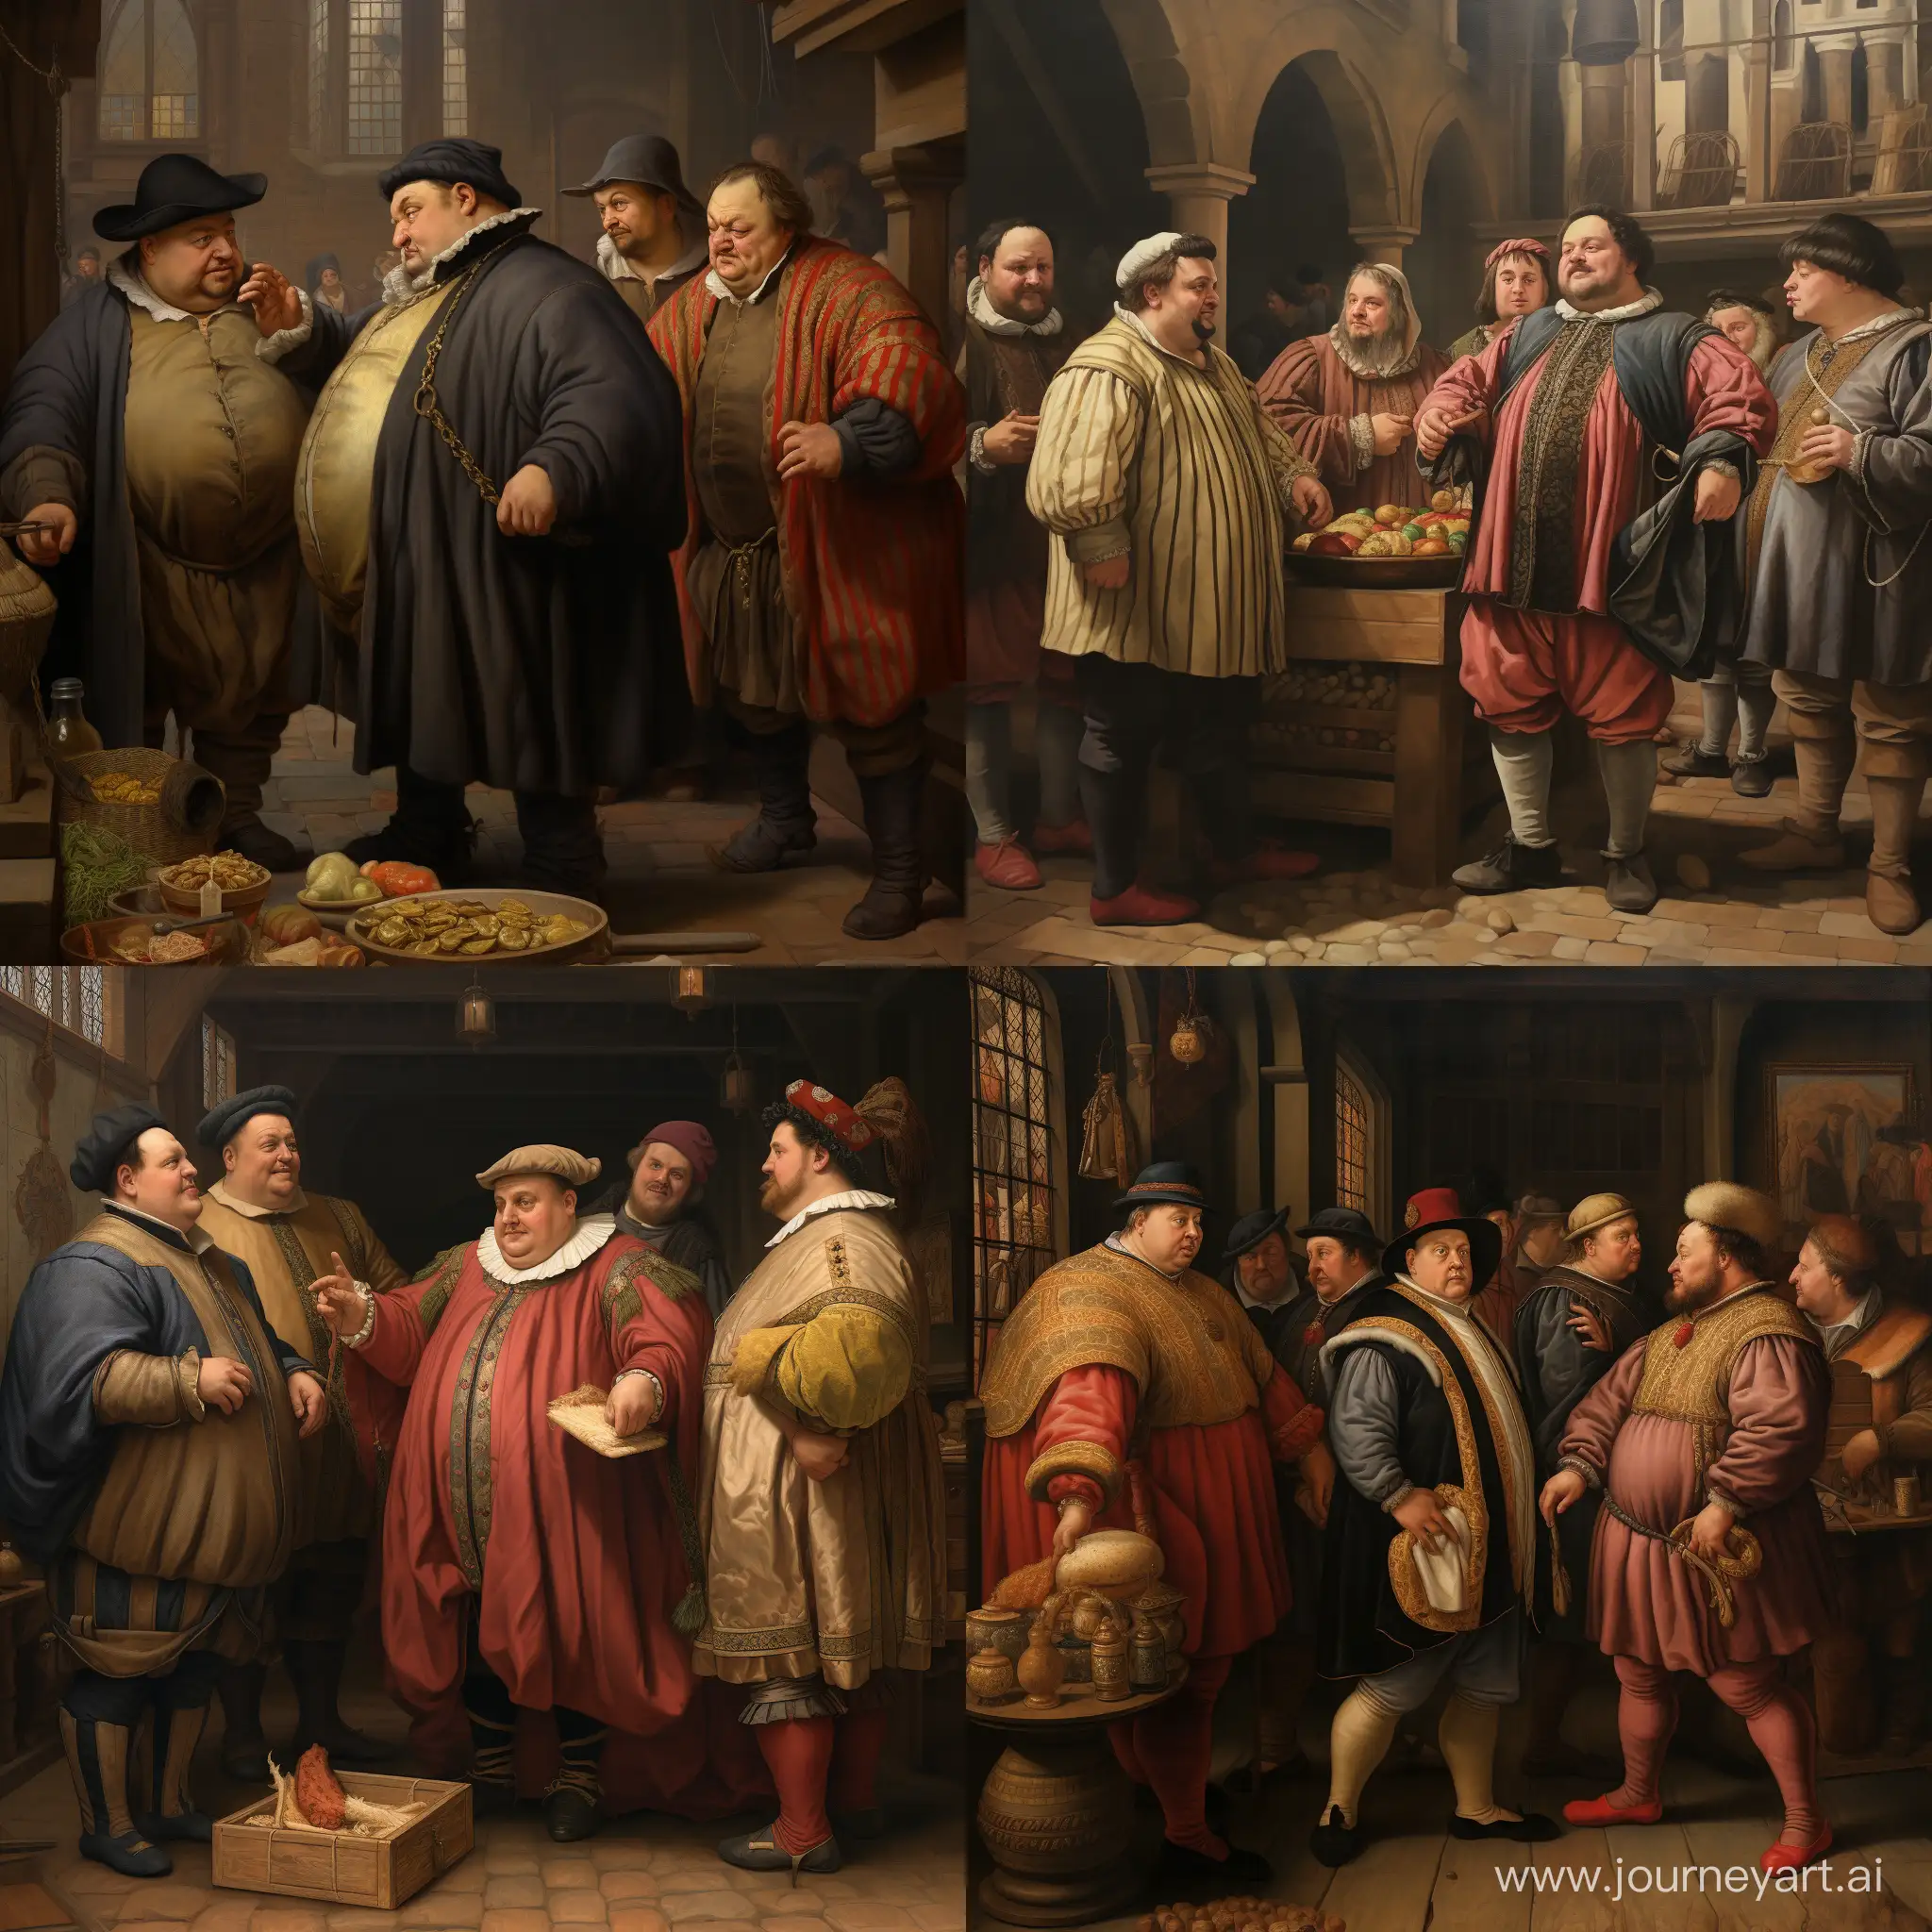 a david style inspired painting of a delegation of fat robed medieval salesman from a guild for production of sugar